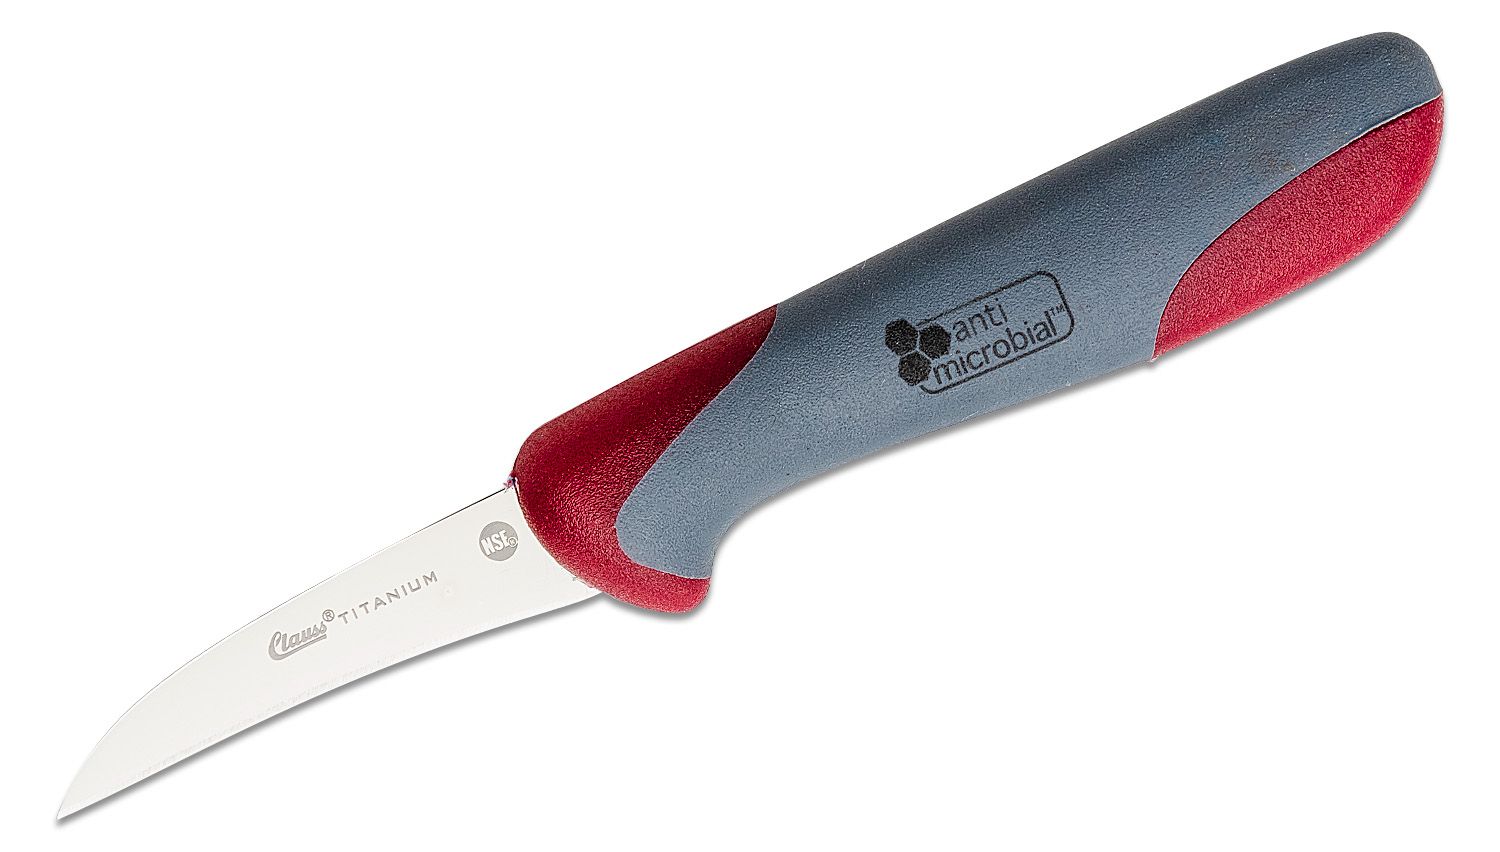 Clauss Titanium Bonded 2.5 Curved Paring Knife, Gray and Red Rubberized  Nylon Handle - KnifeCenter - 18414